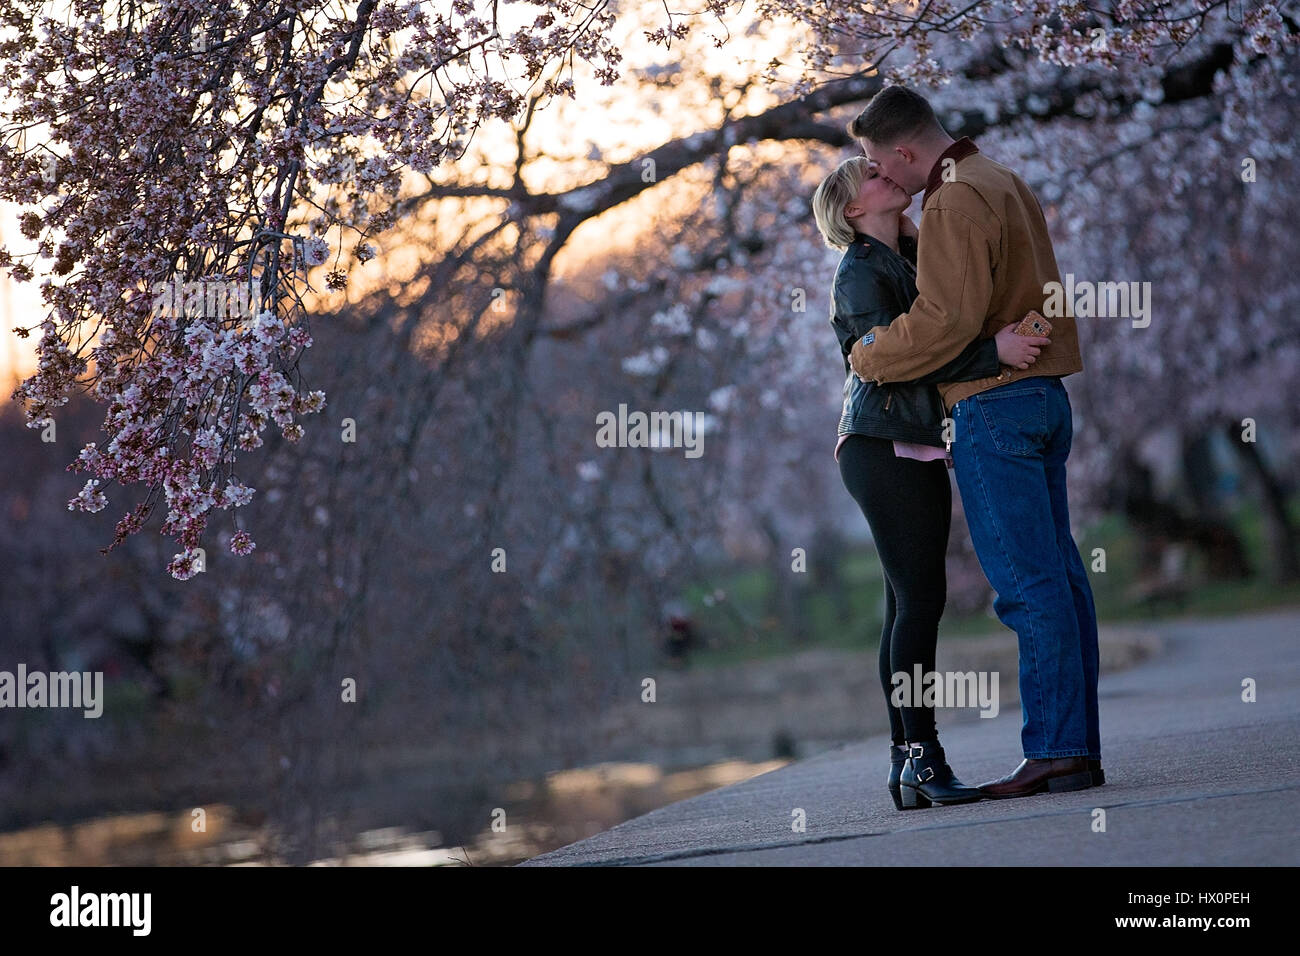 A couple kisses under the Cherry Blossom trees that line the Tidal Basin on the National Mall in Washington, D.C. March 22, 2017. Stock Photo